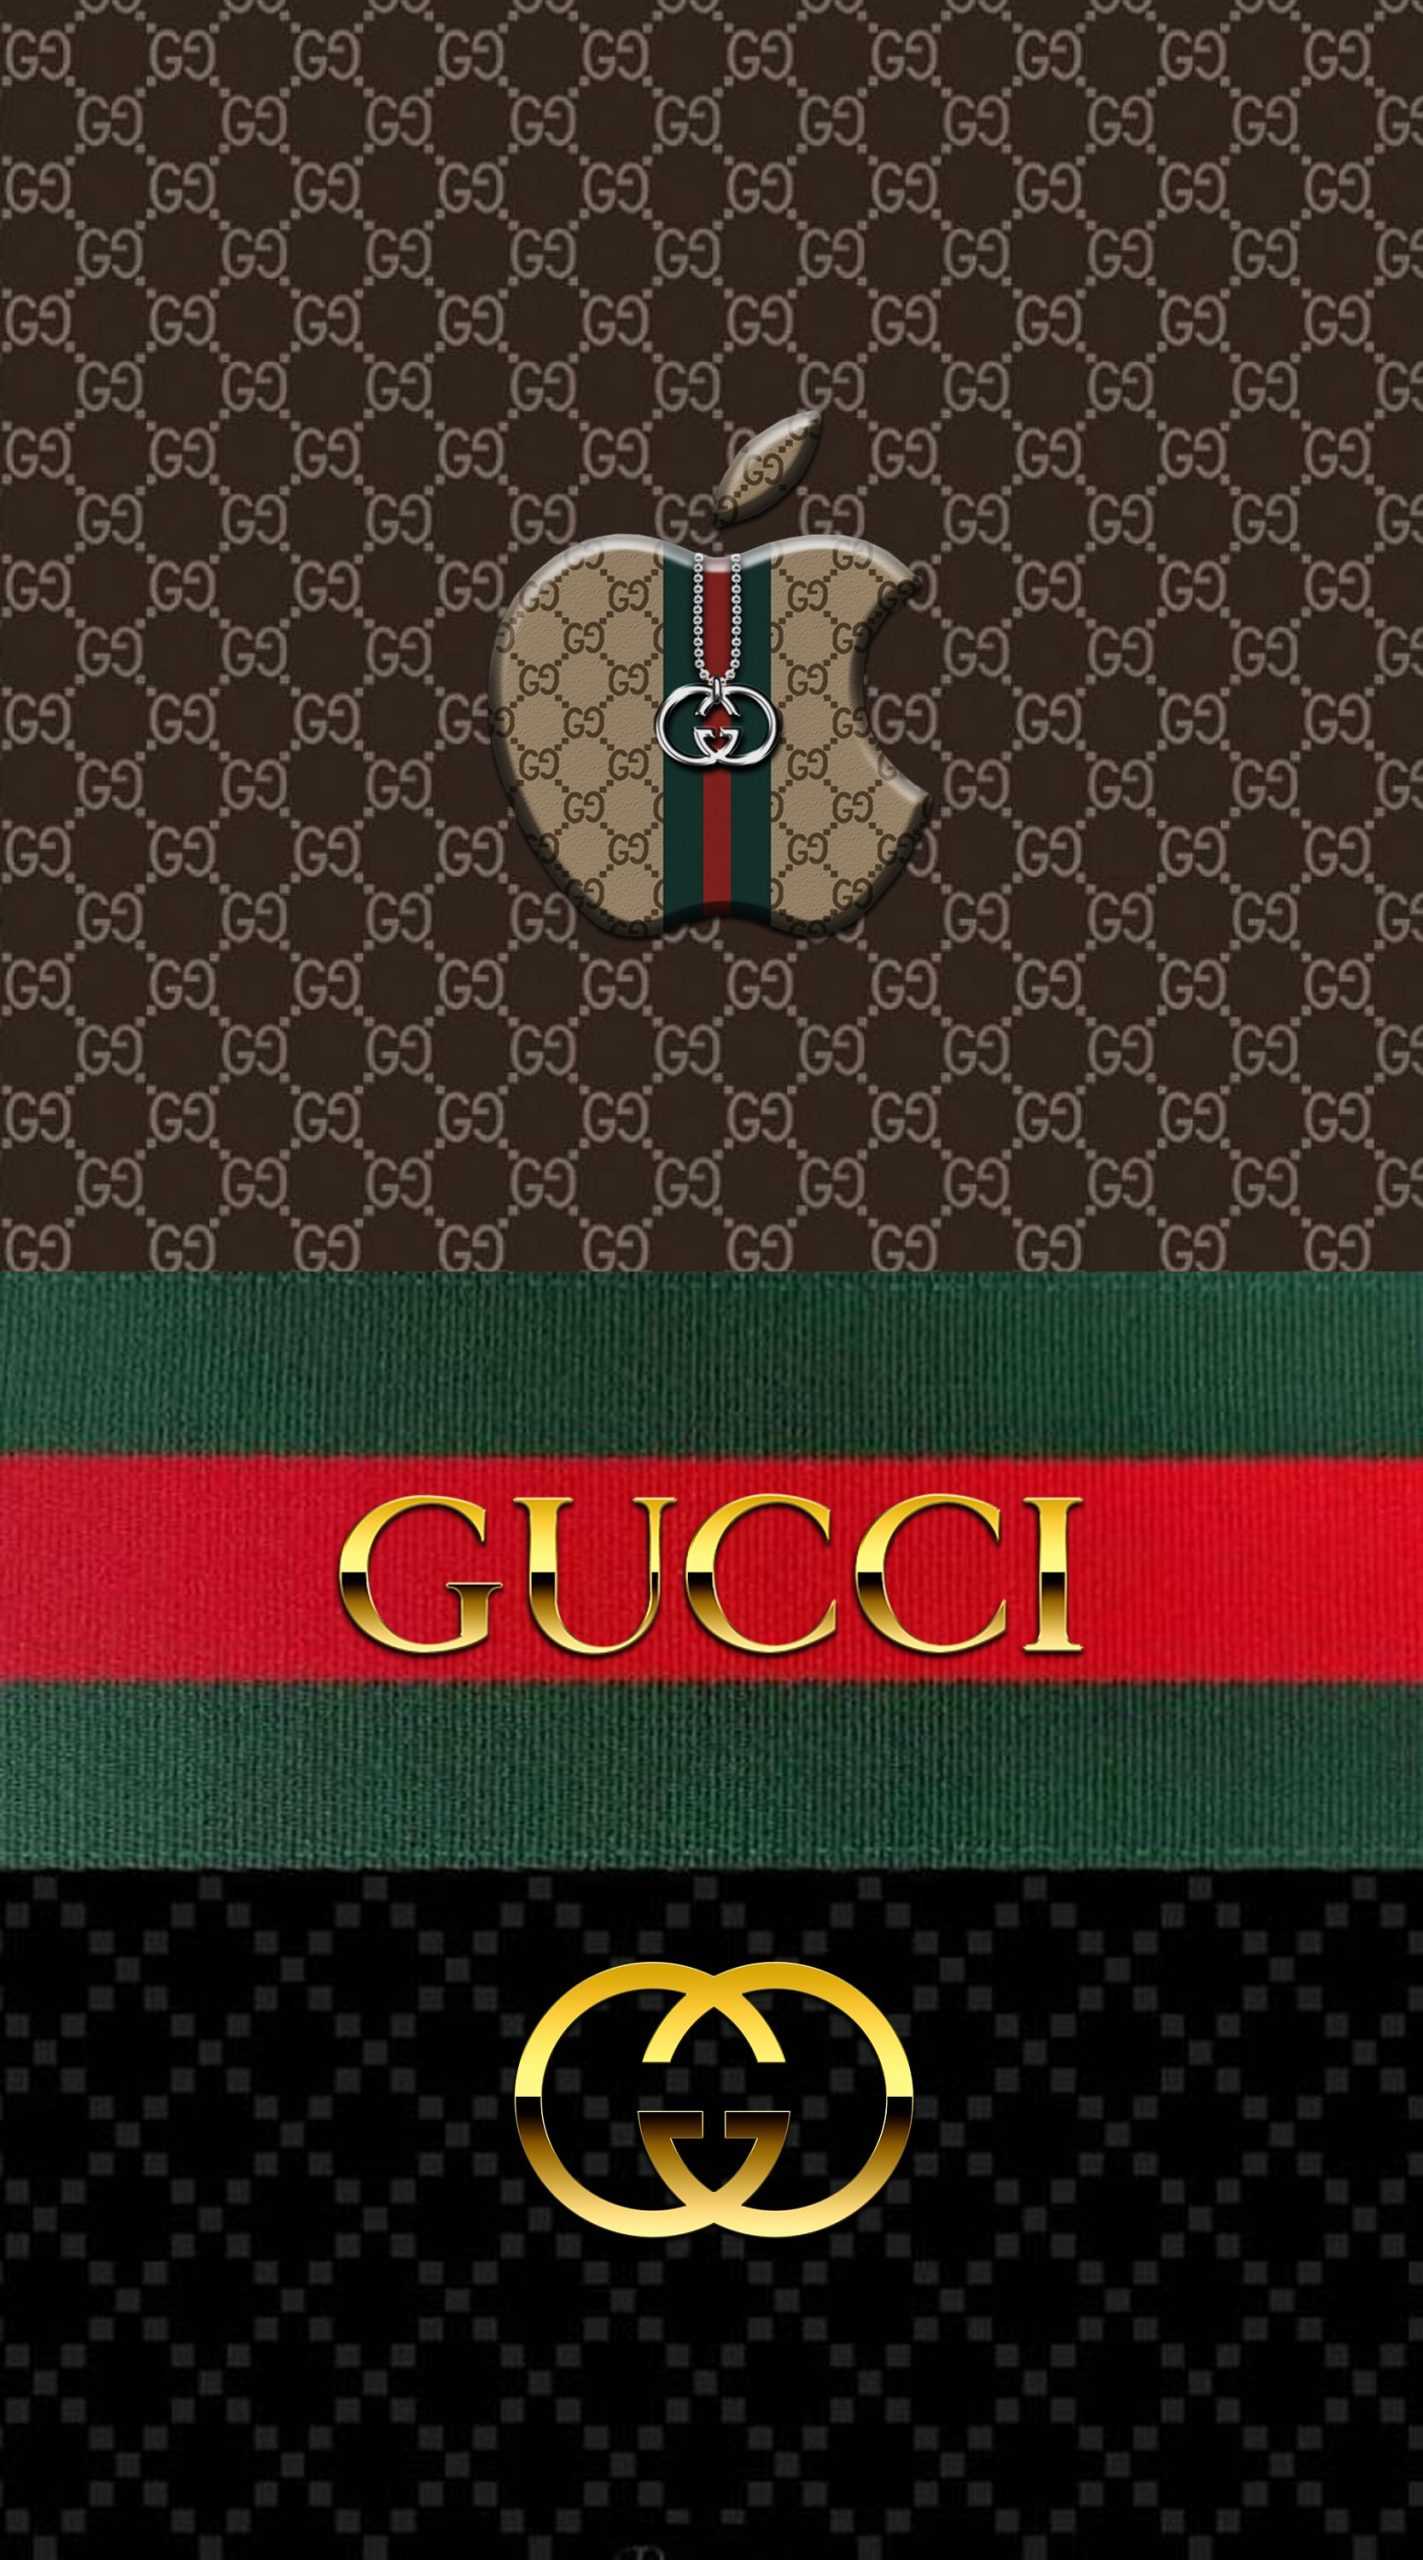 Download Experience Supreme Luxury with Gucci Wallpaper